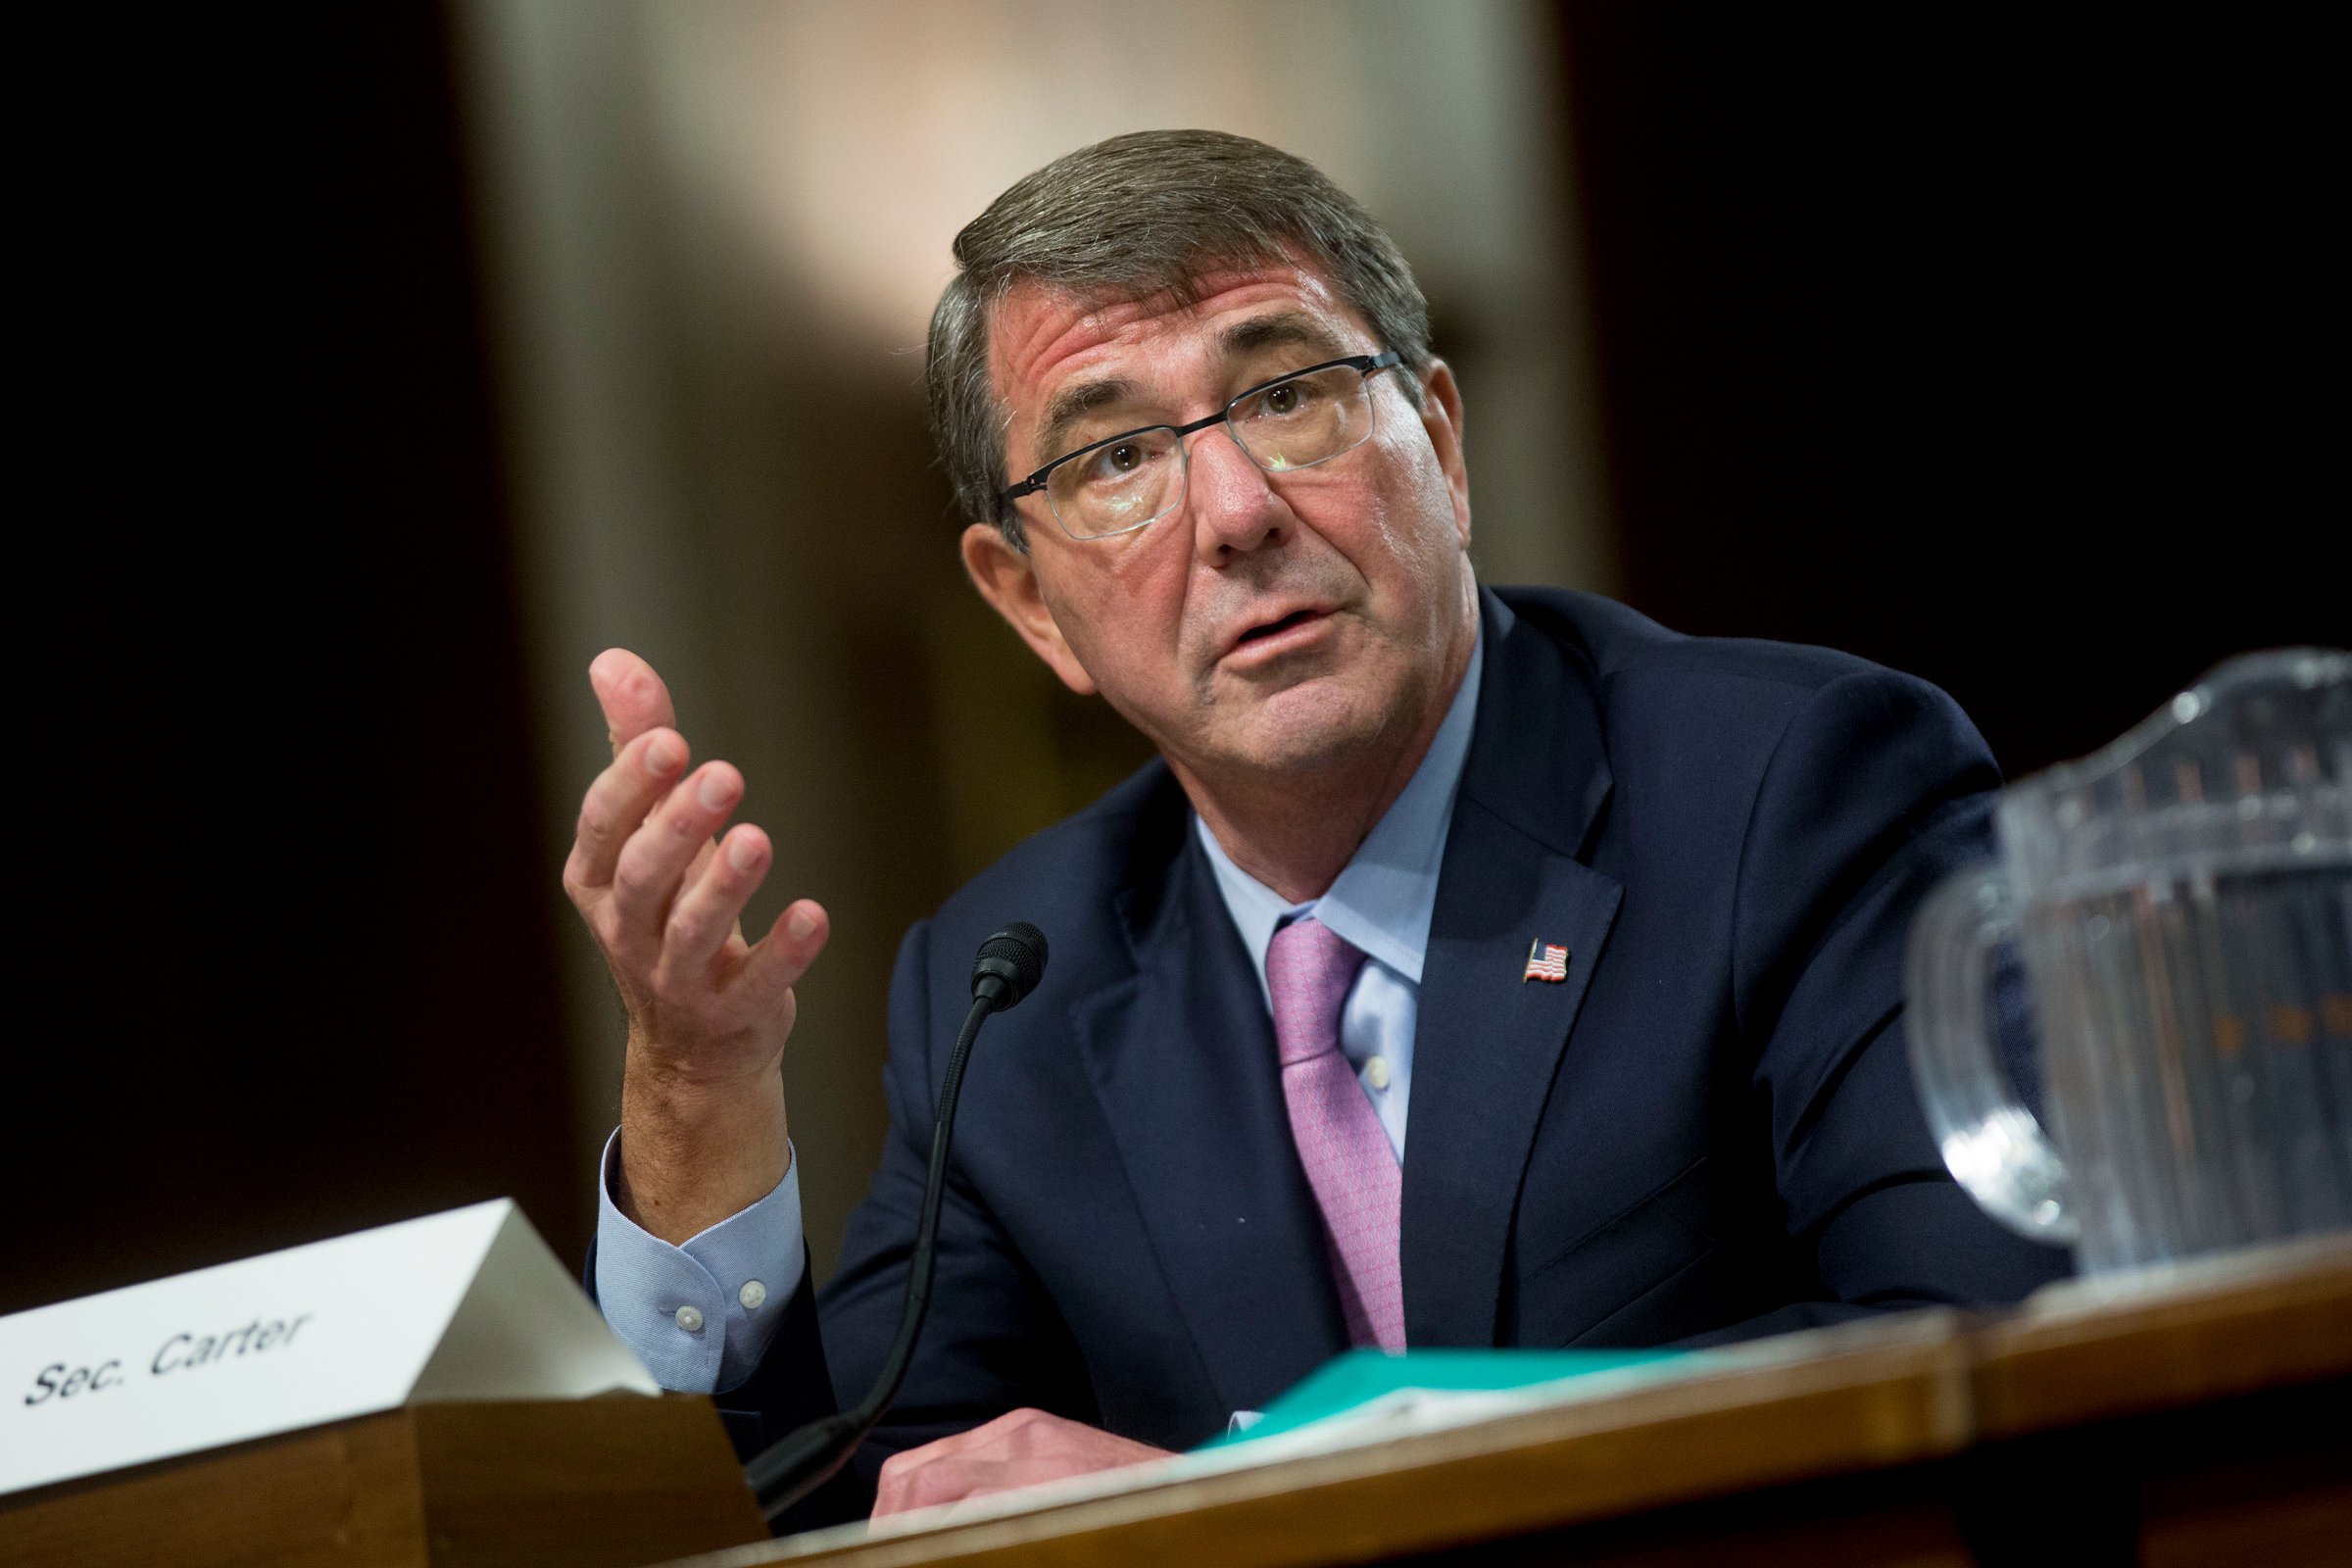 Defense Secretary Ashton Carter Testifies On Middle East Middle East Policy